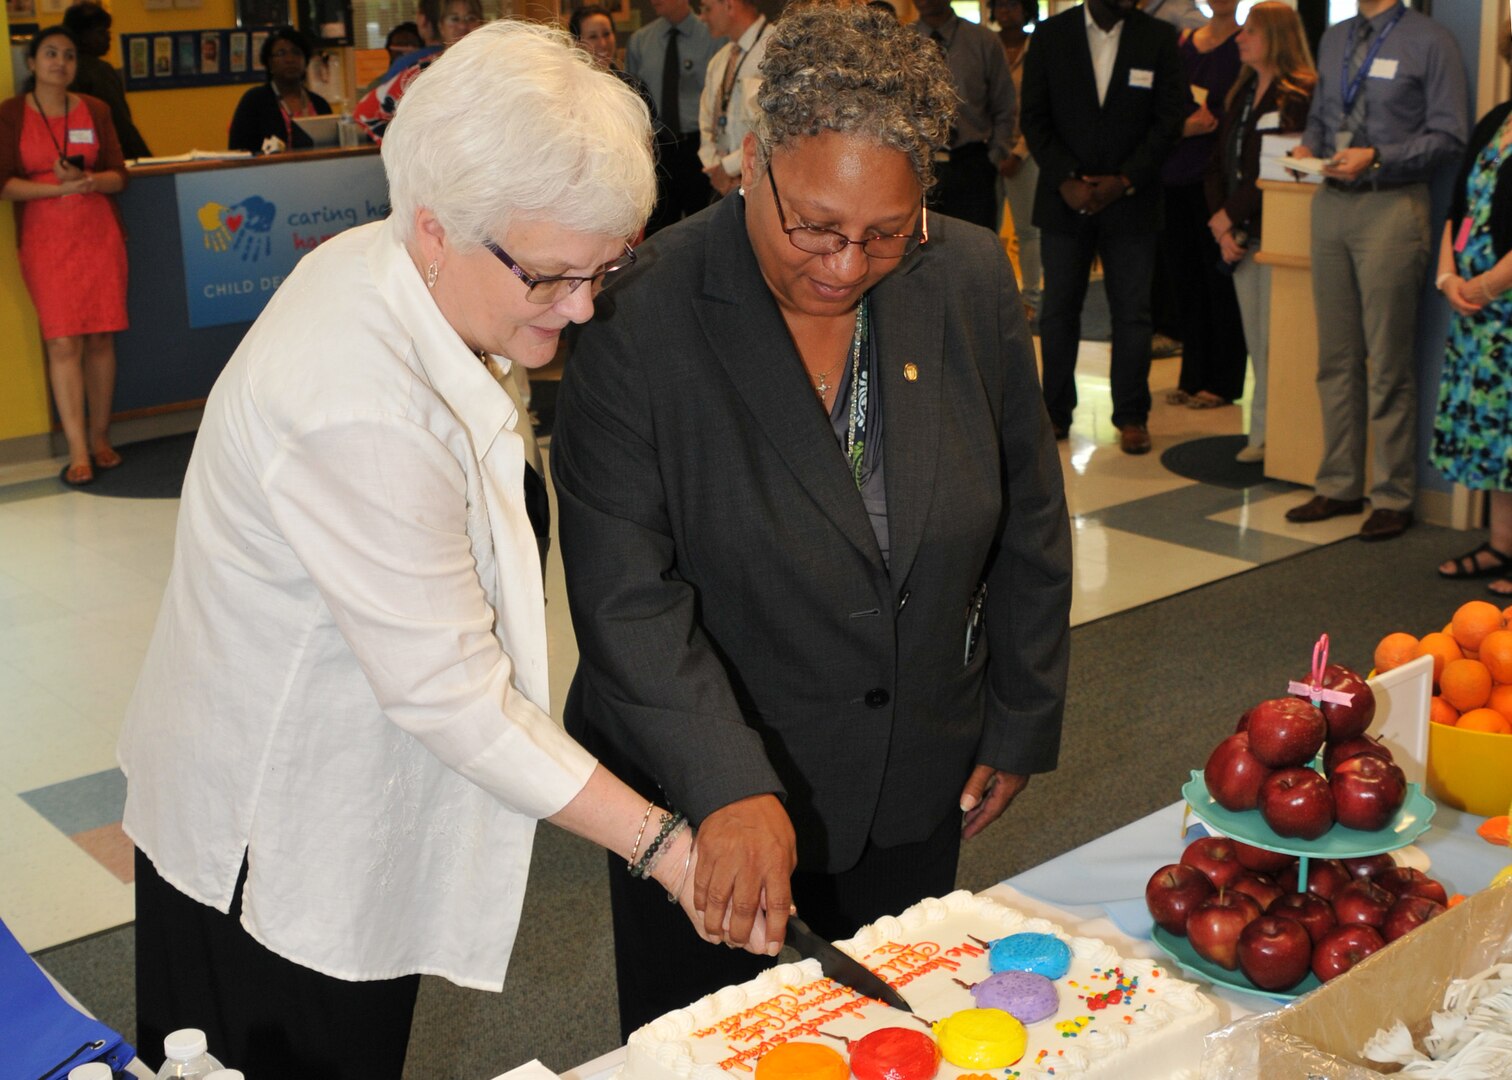 New DLA Headquarters Child Development Center Director Wendy Paul and DLA Chief of Staff Renee Roman cut the cake at the official reopening of the CDC at Fort Belvoir, Virginia, June 5. Photo by Teodora Mocanu.